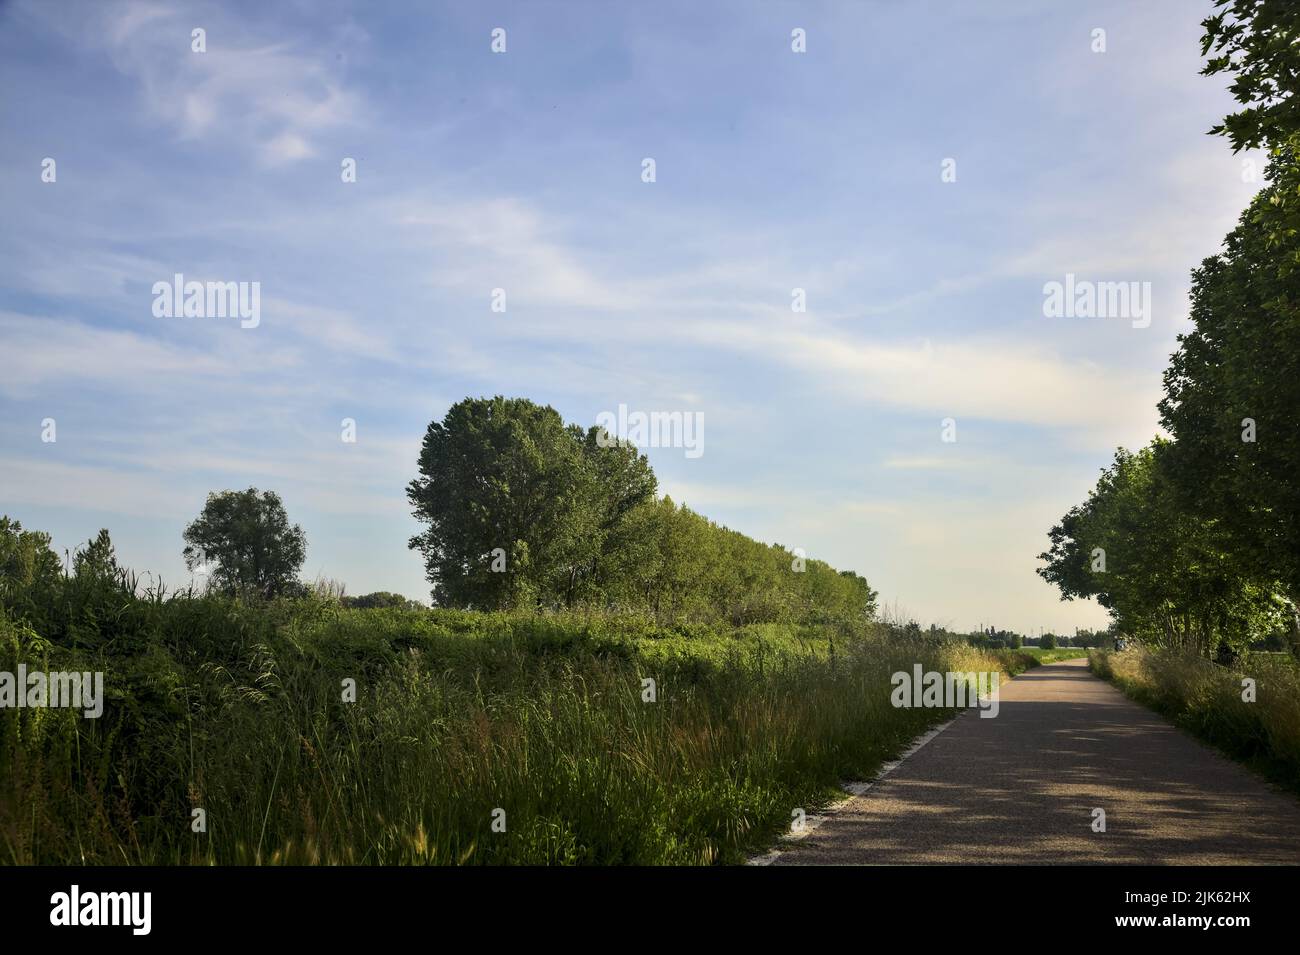 Country road in the middle of cultivated fields with a row of poplars at the edge of a field at sunset Stock Photo